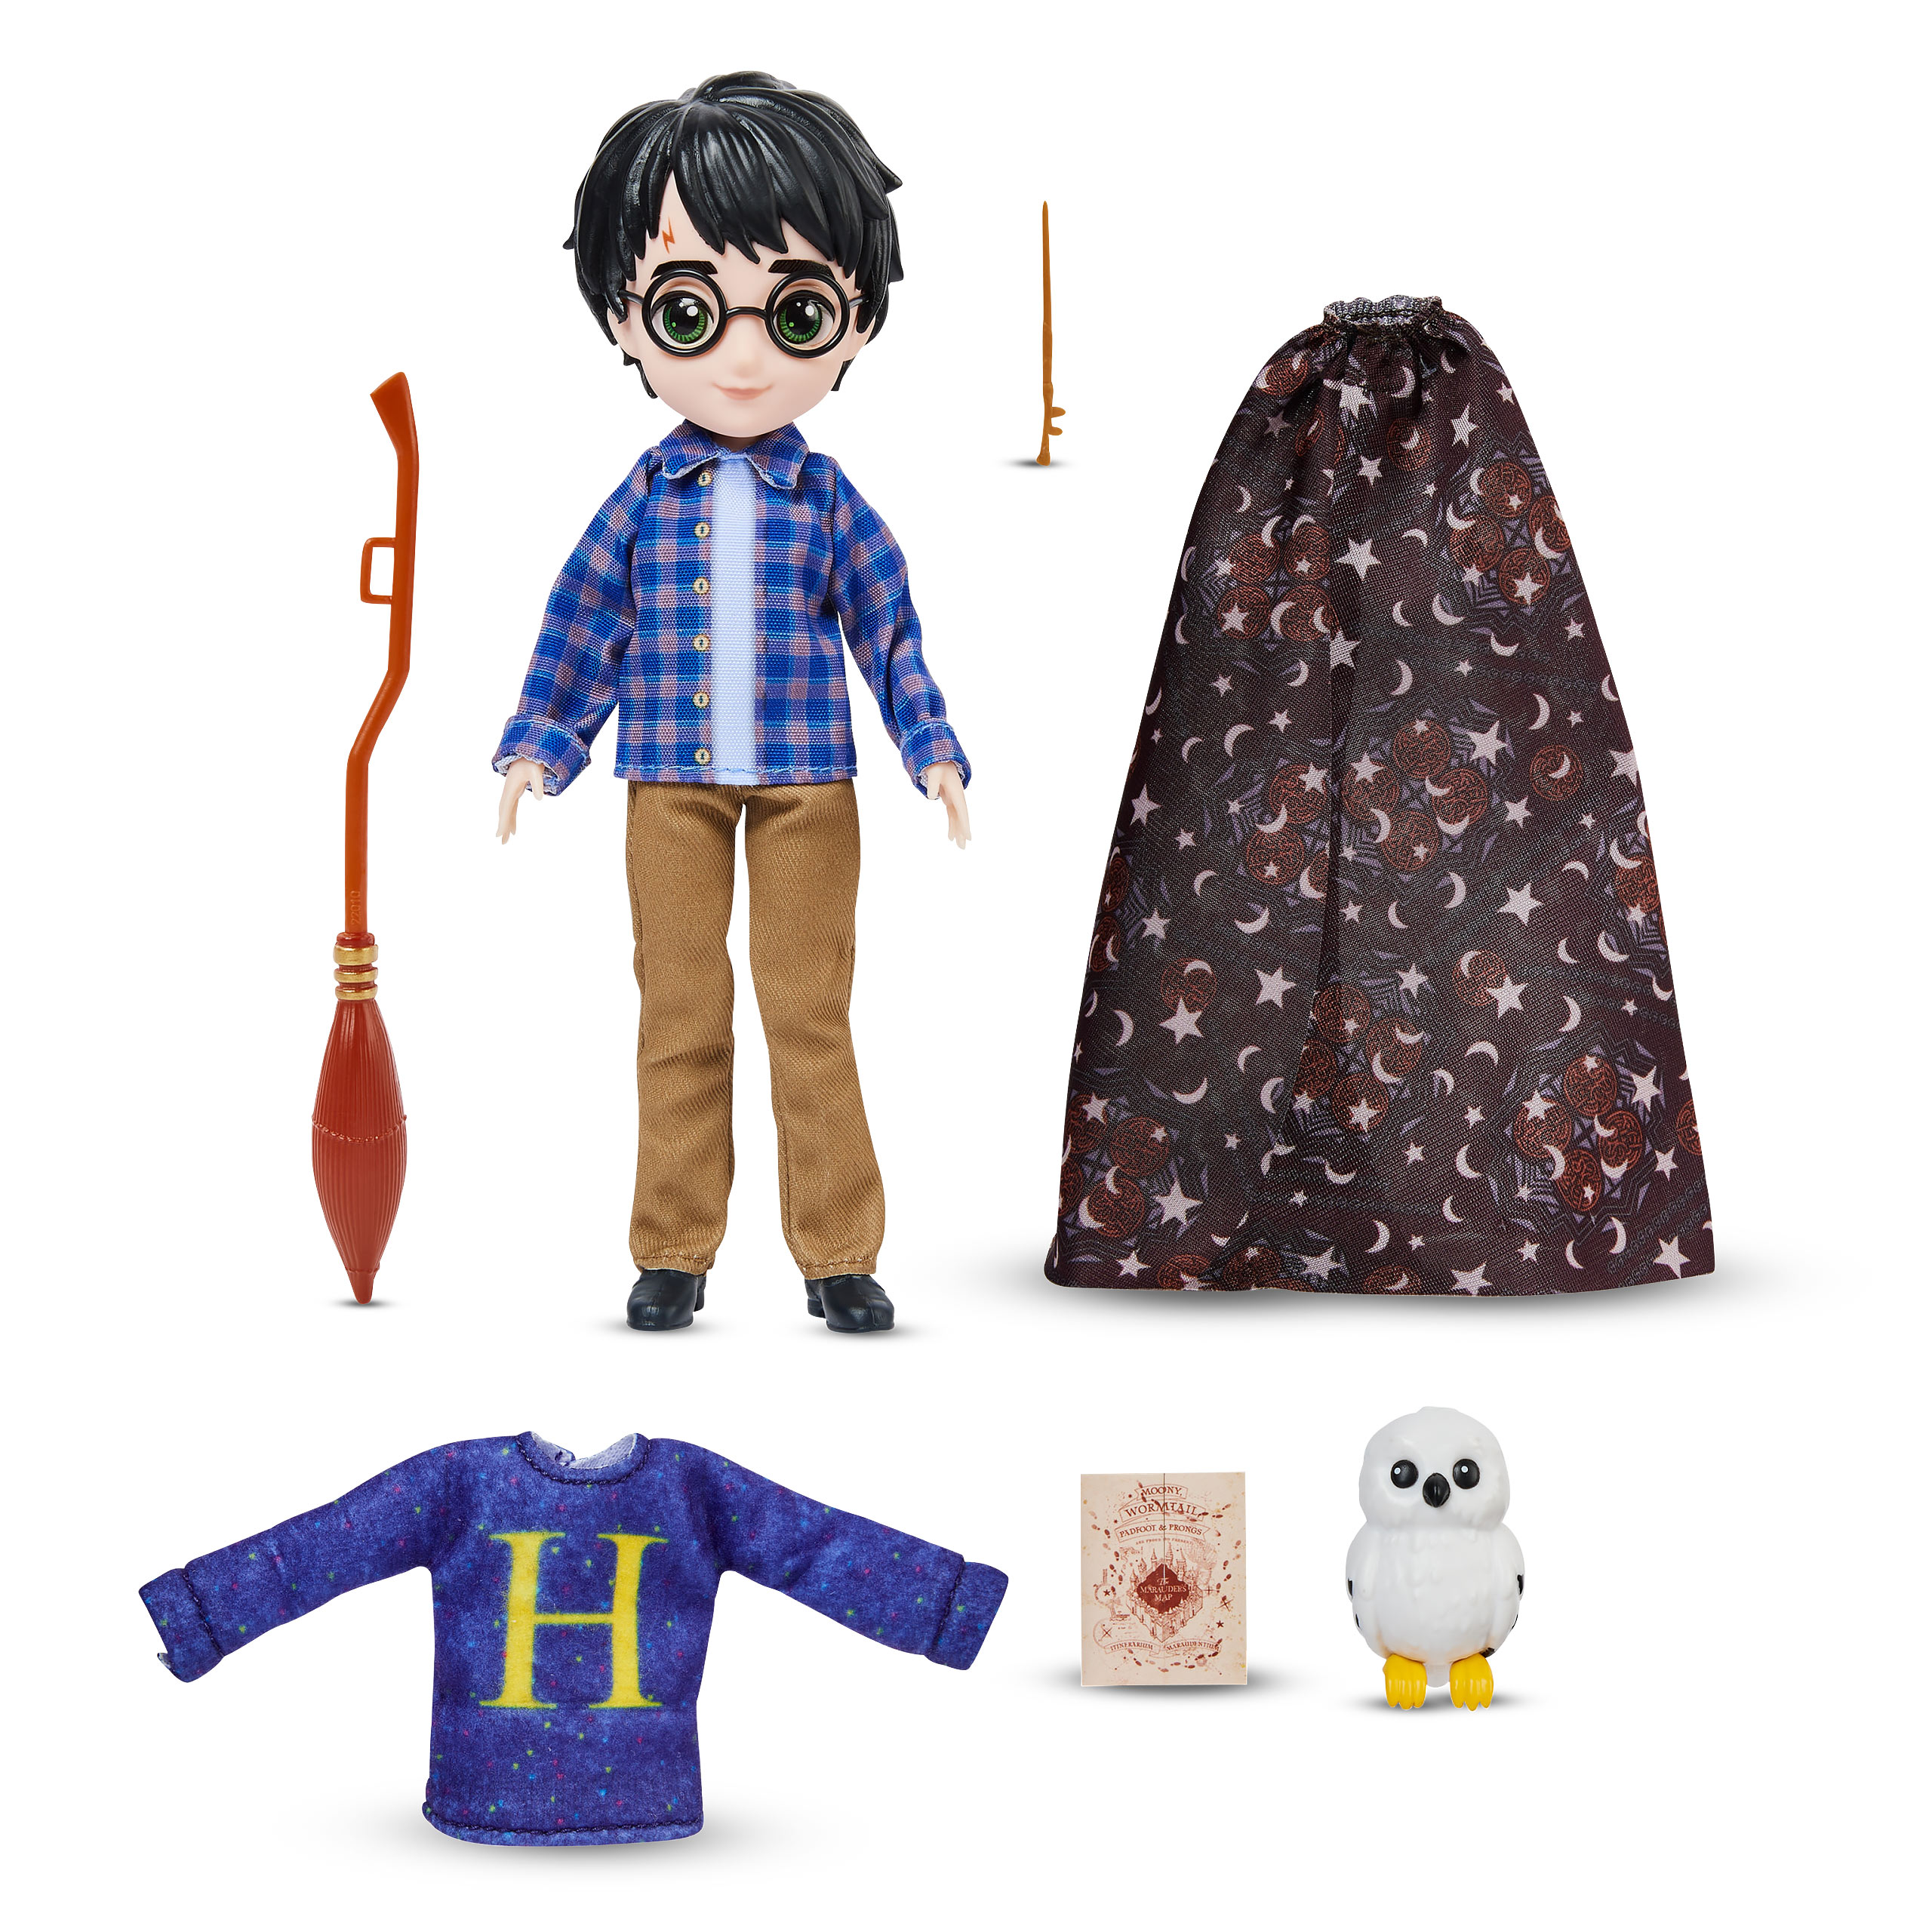 Harry Potter Deluxe Doll with Hedwig